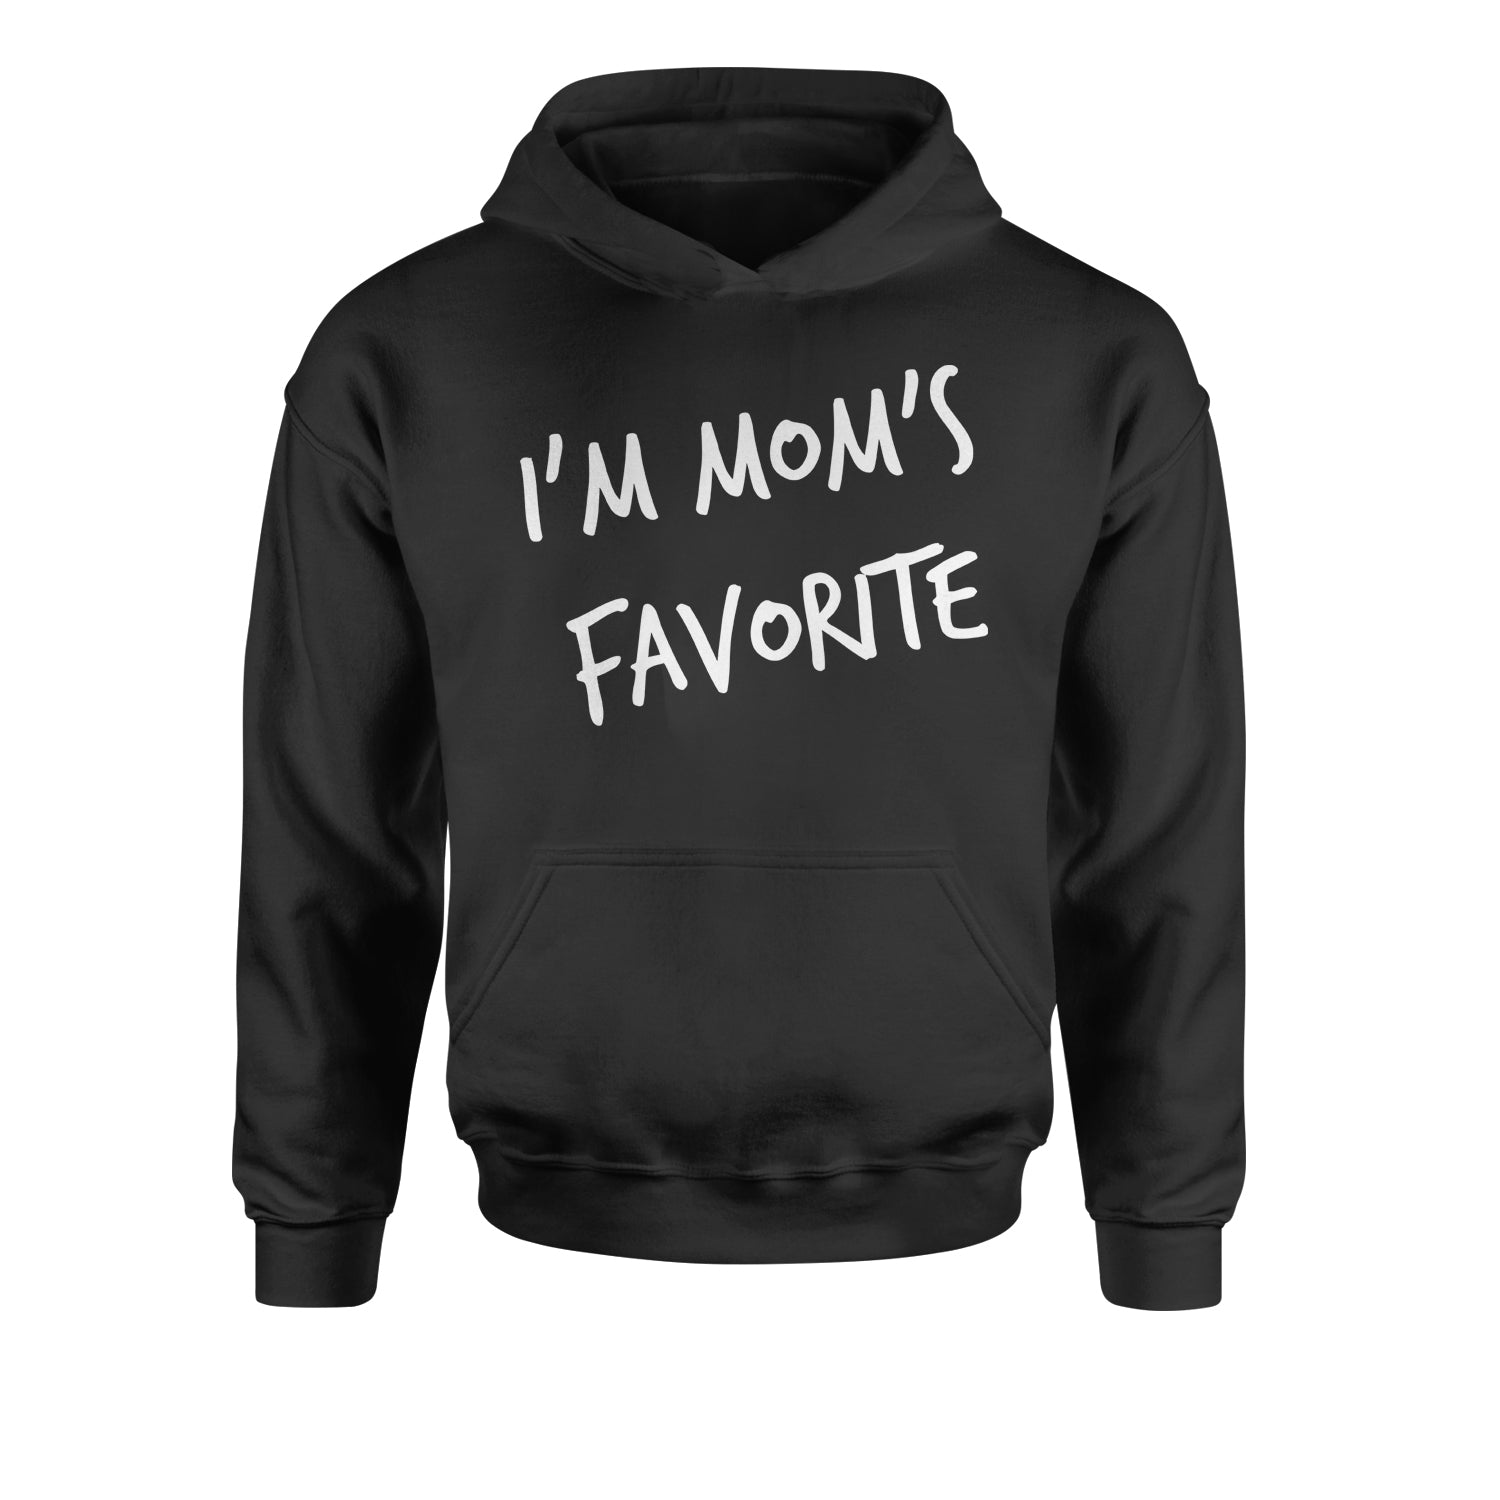 I'm Mom's Favorite Youth-Sized Hoodie bear, buck, mama, papa by Expression Tees